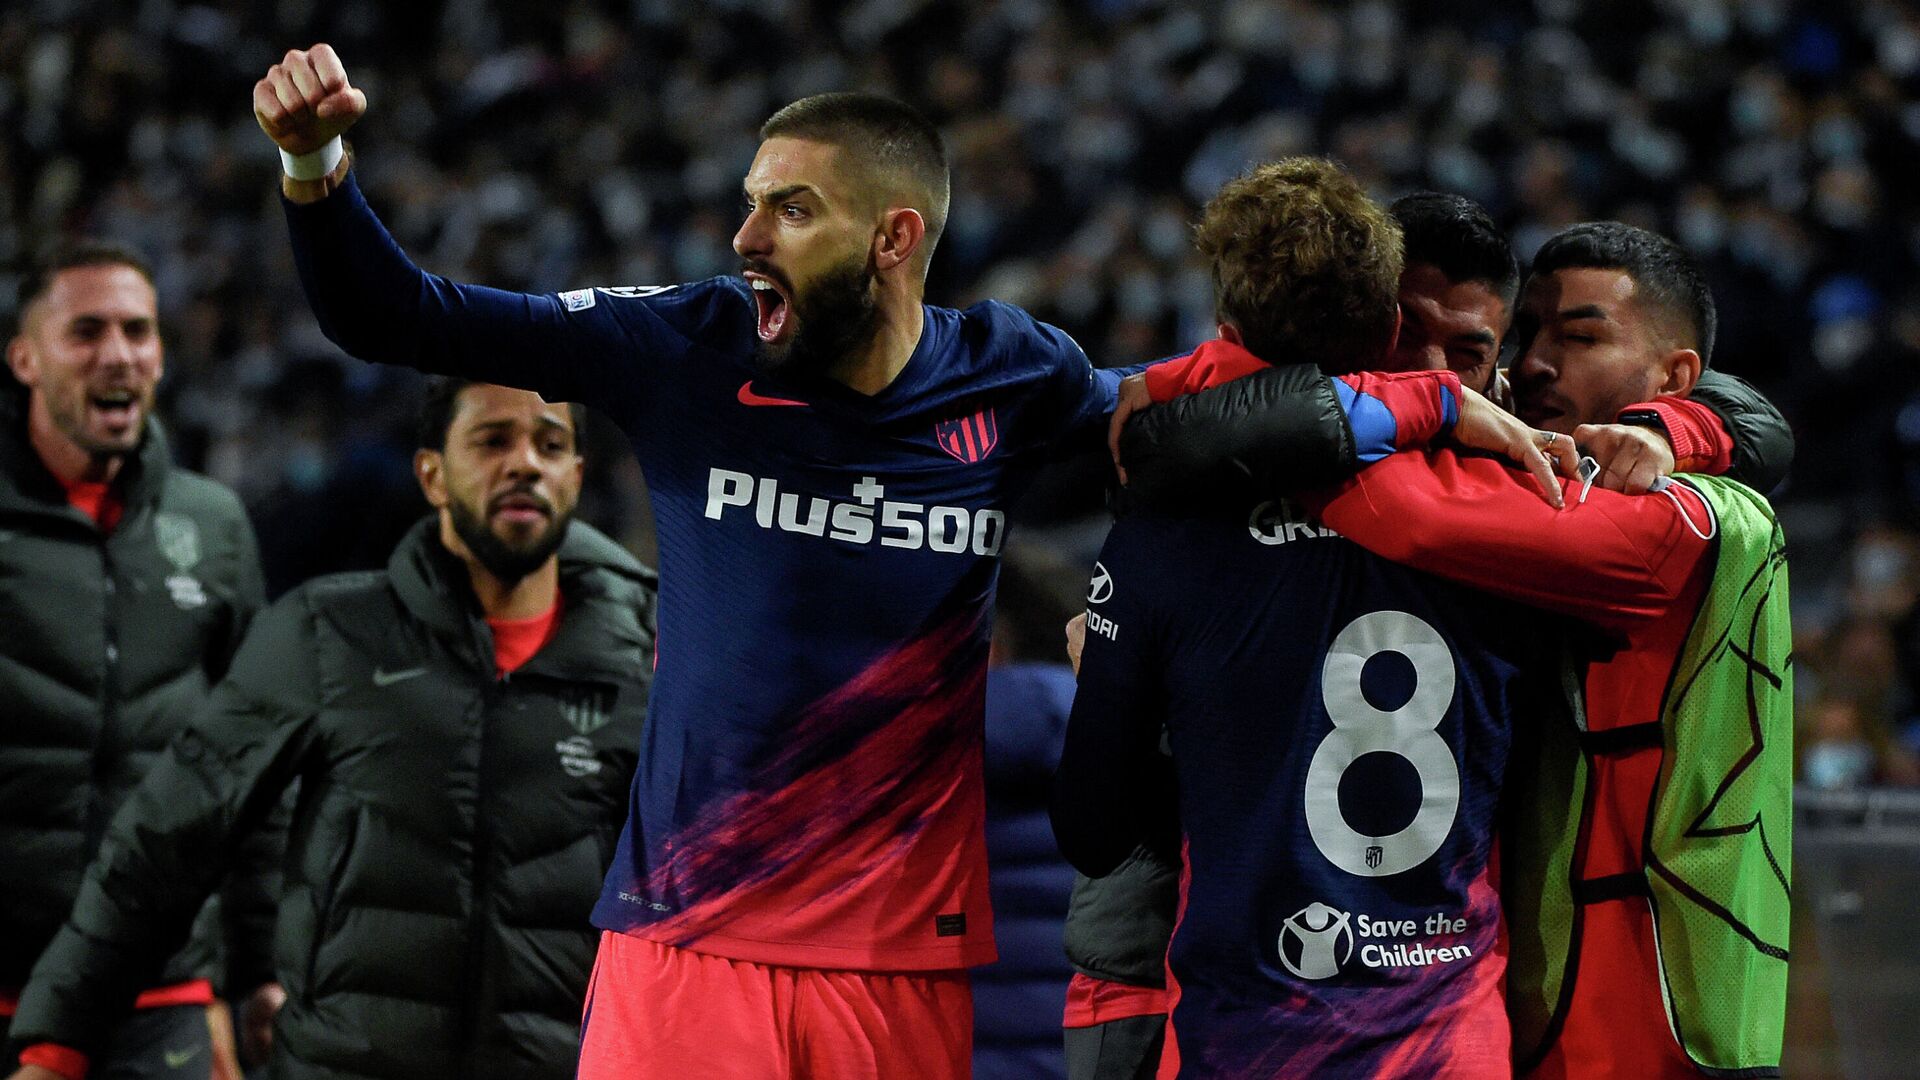 Atletico Madrid's French forward Antoine Griezmann (C) celebrates with teammates after scoring his team's first goal during the UEFA Champions League first round group B football match between FC Porto and Club Atletico de Madrid at the Dragao stadium in Porto on December 7, 2021. (Photo by MIGUEL RIOPA / AFP) - РИА Новости, 1920, 08.12.2021